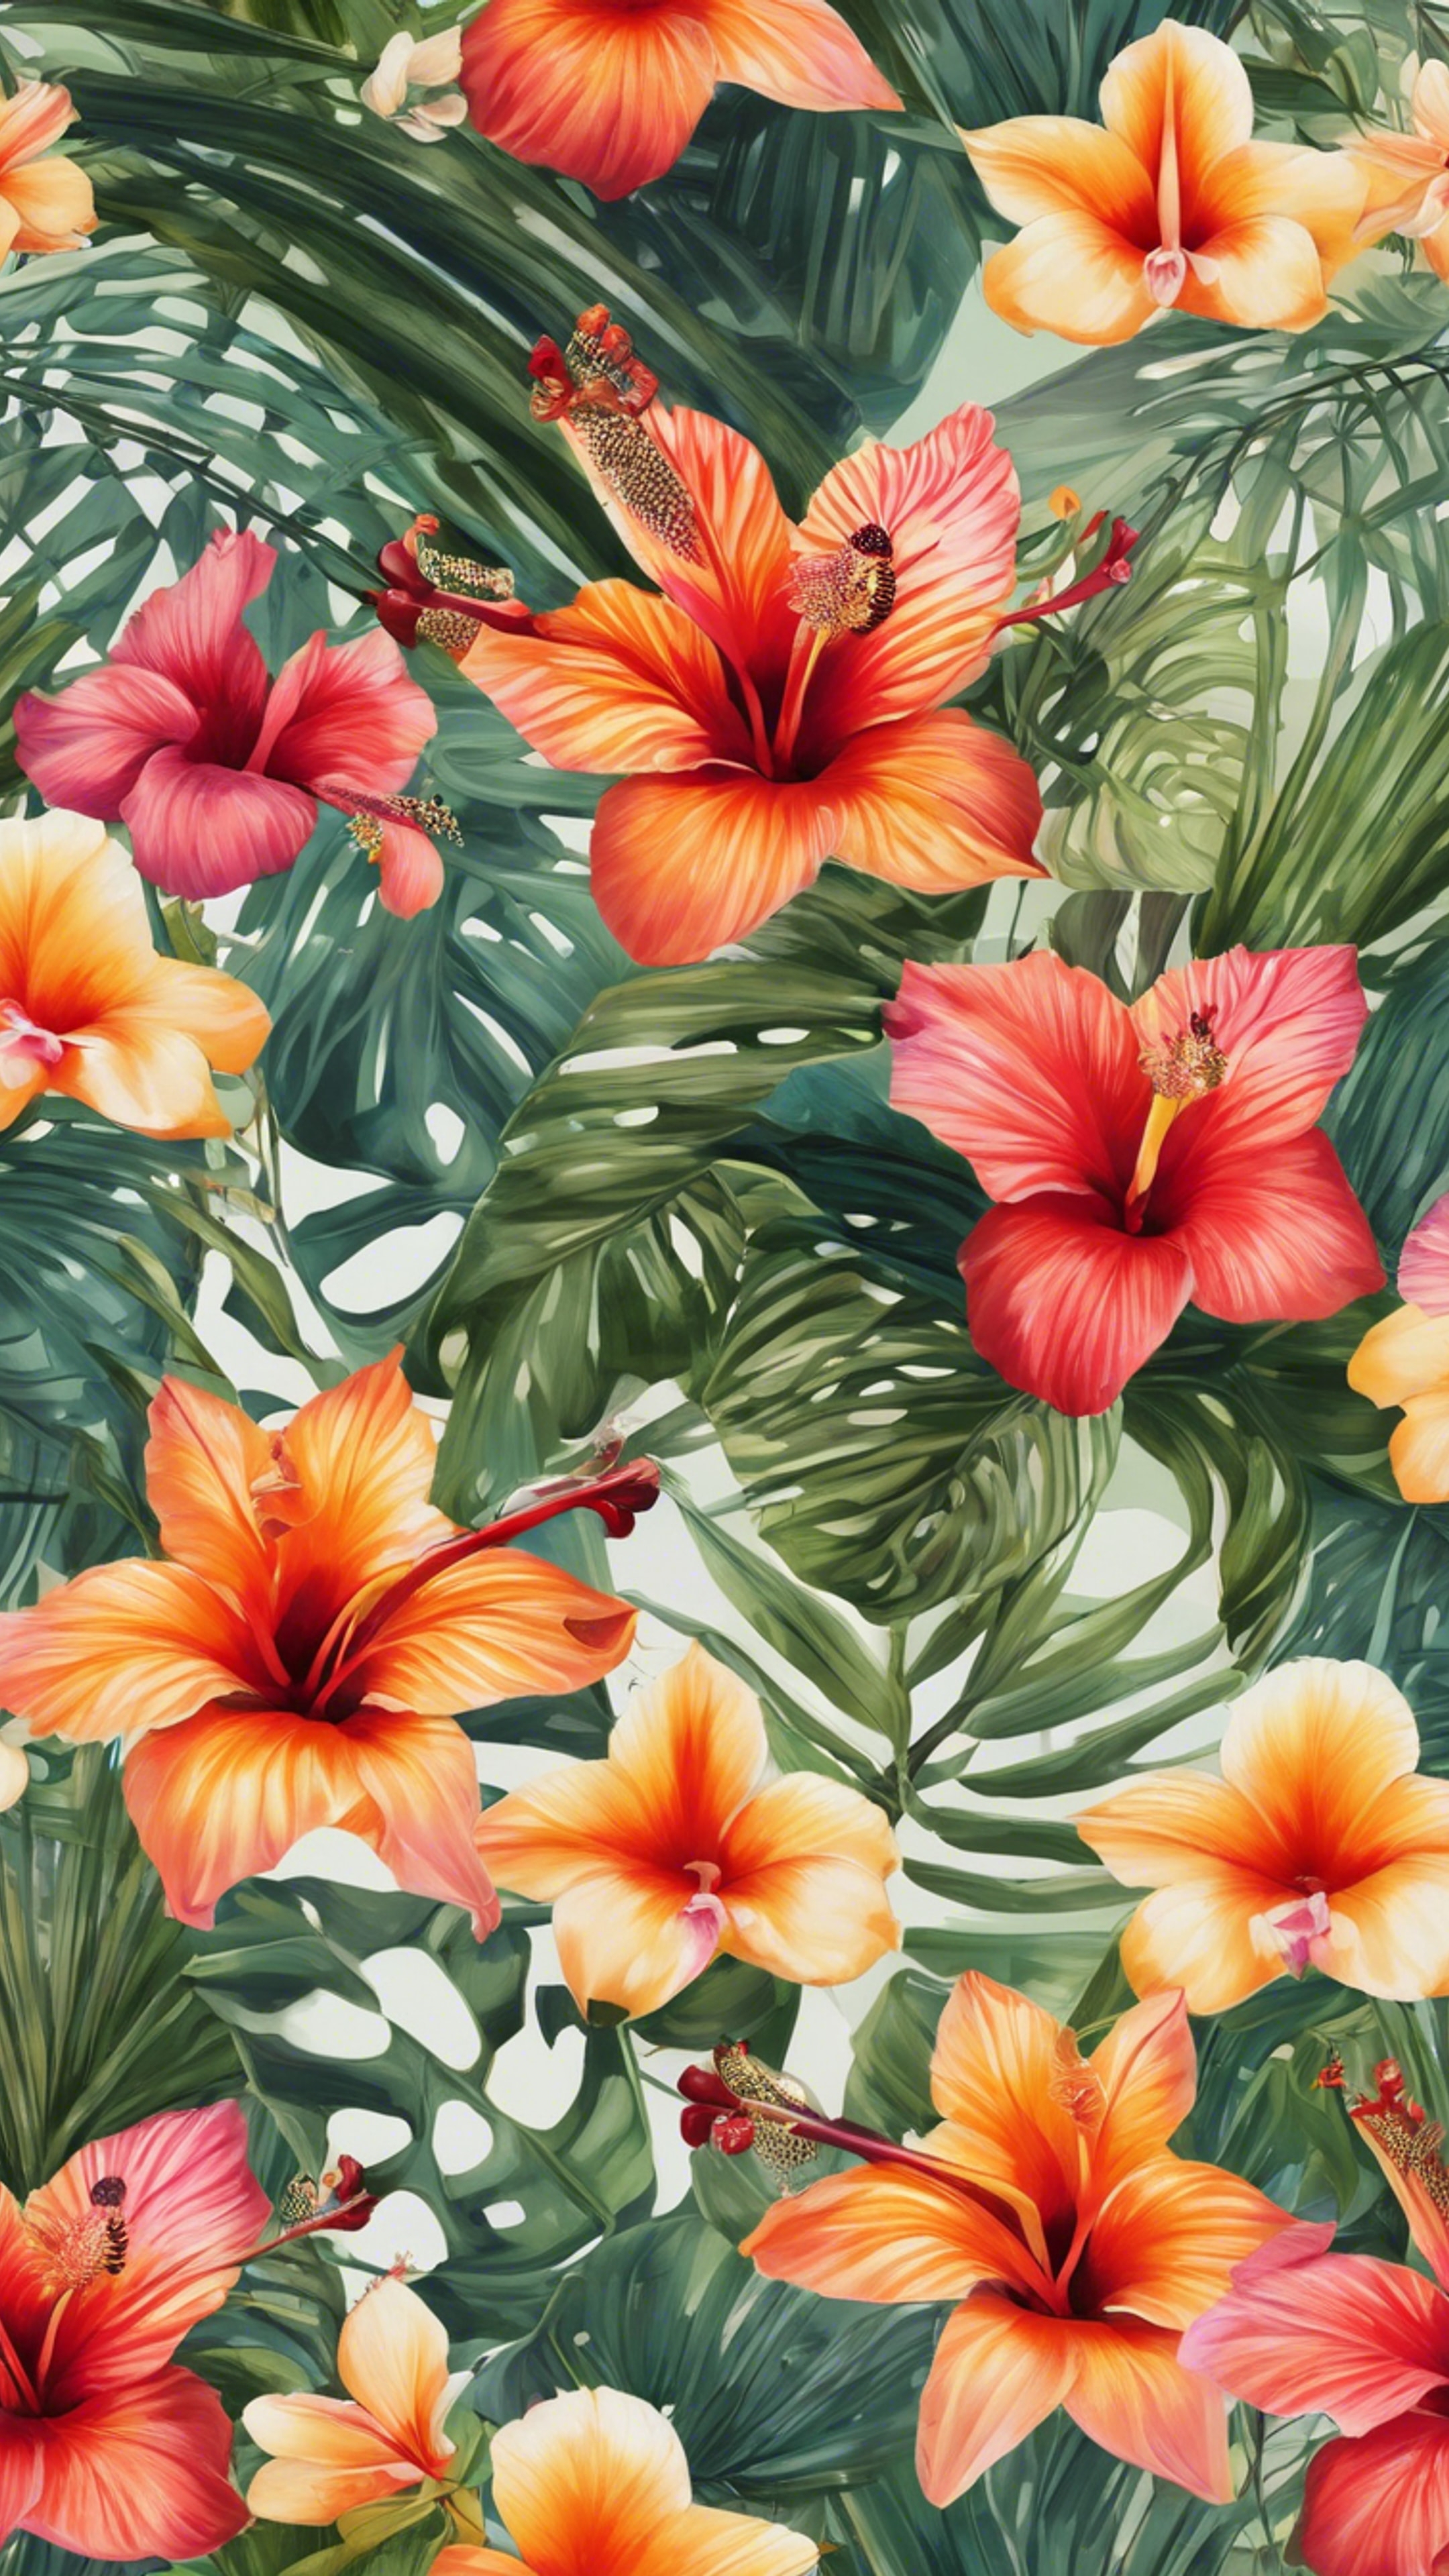 A tropical floral pattern with bursts of hibiscus, orchids, and birds of paradise.壁紙[431d72635e0a407e8628]